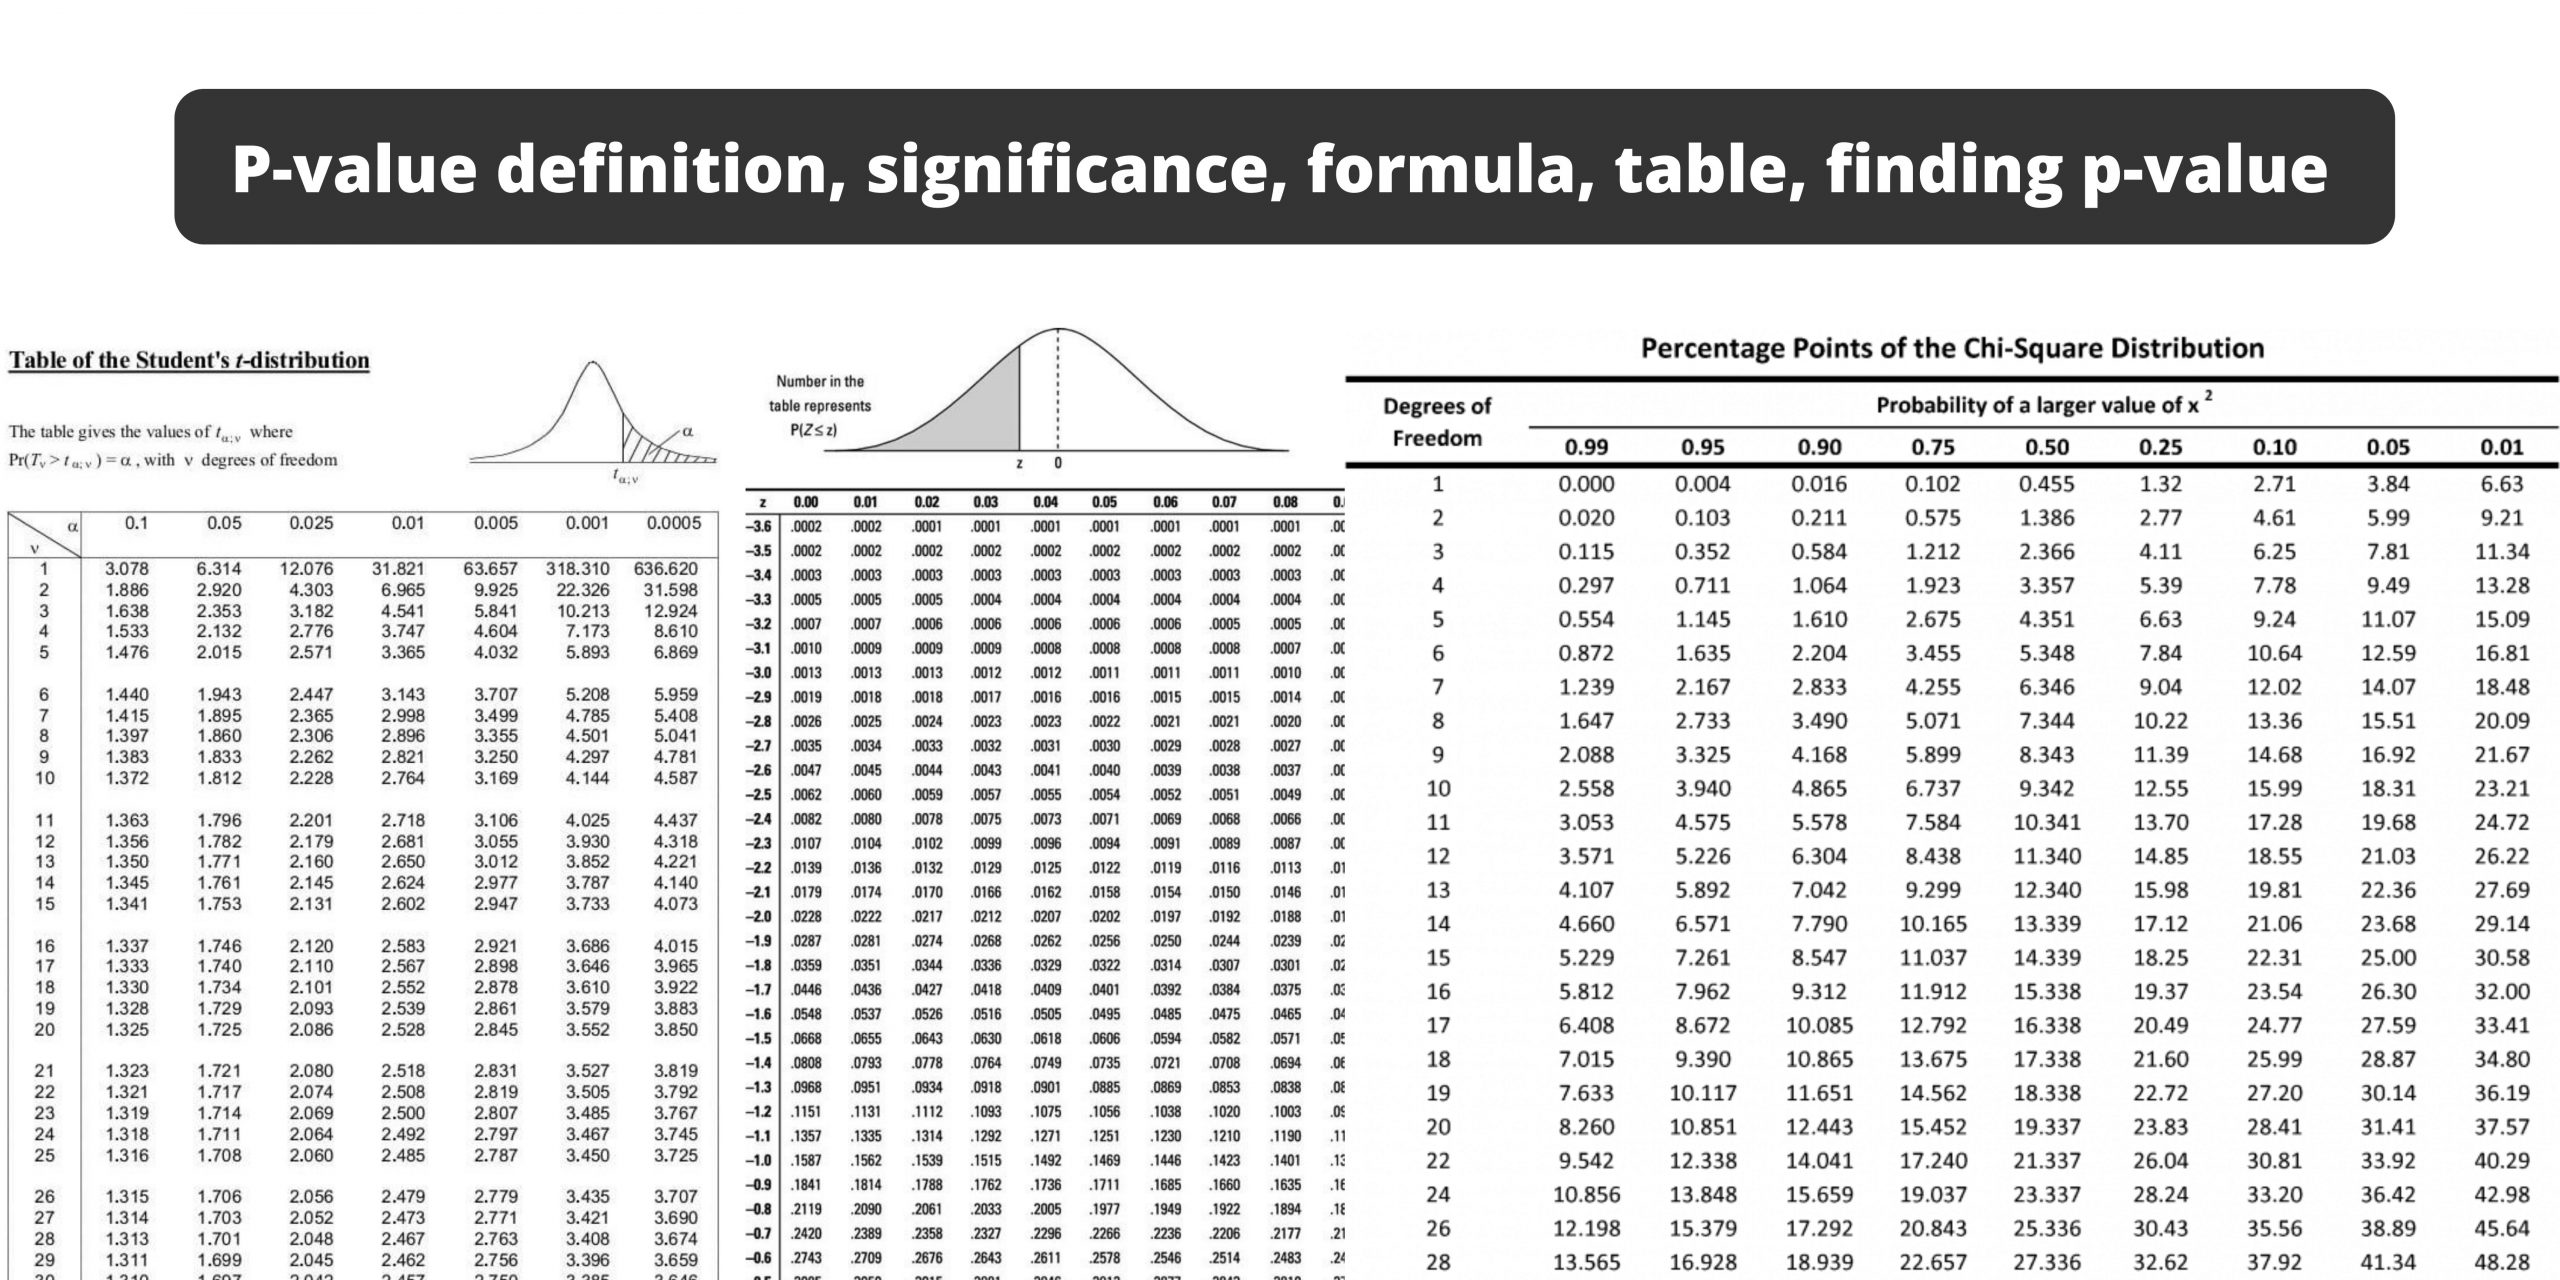 P-value definition, significance, formula, table, finding p-value